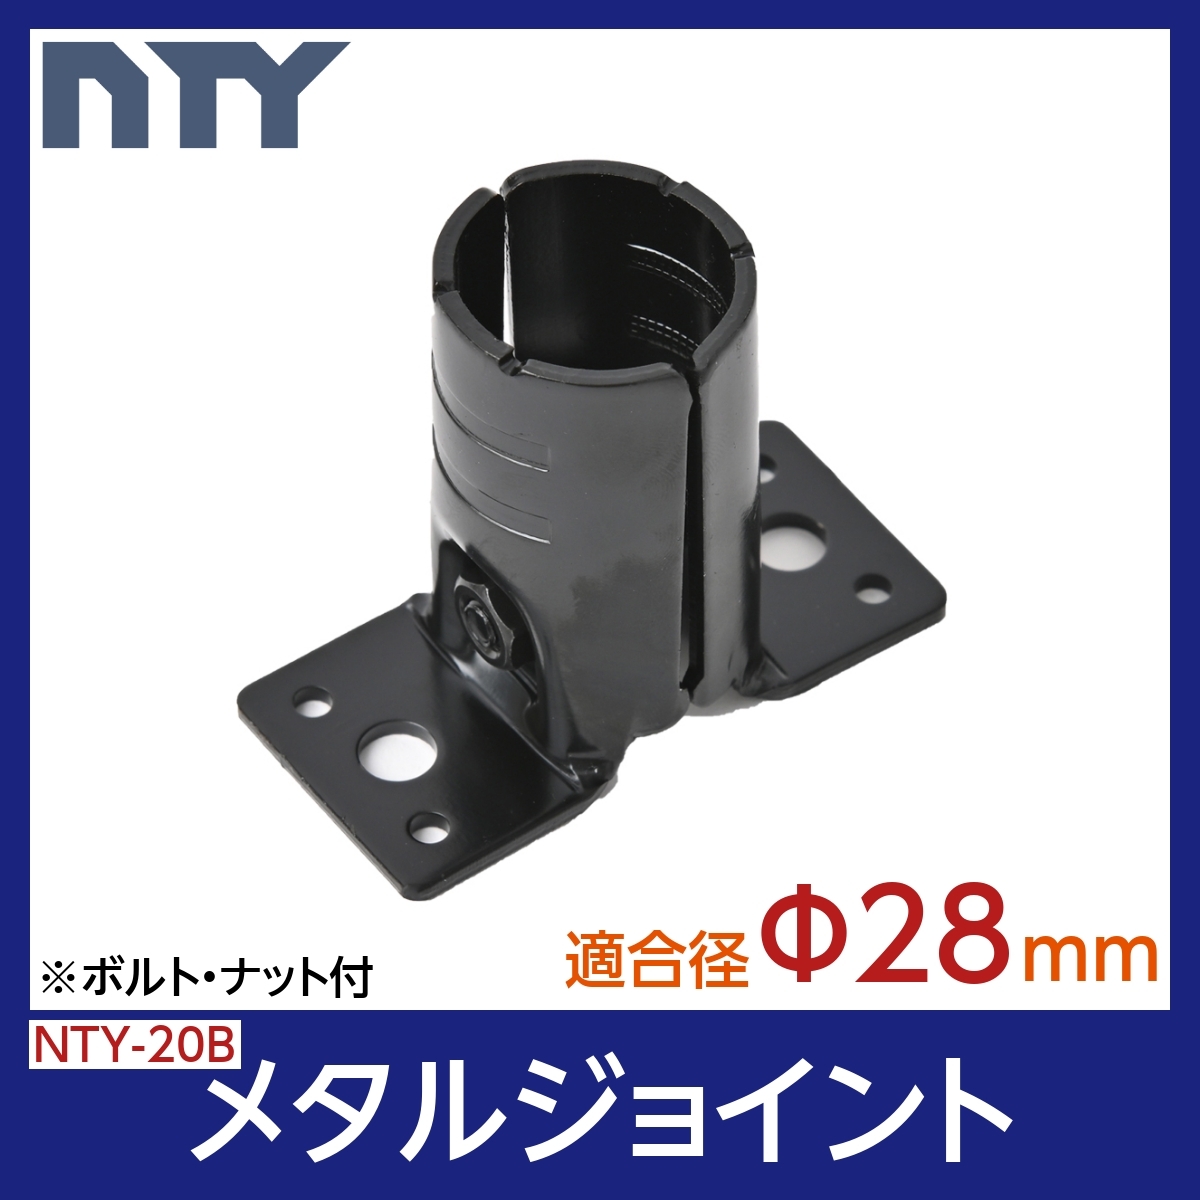 NTY metal joint NTY-20B black Φ28mm for pipe system assembly pipe joint coupling joint DIY shelves middle amount light weight rack 